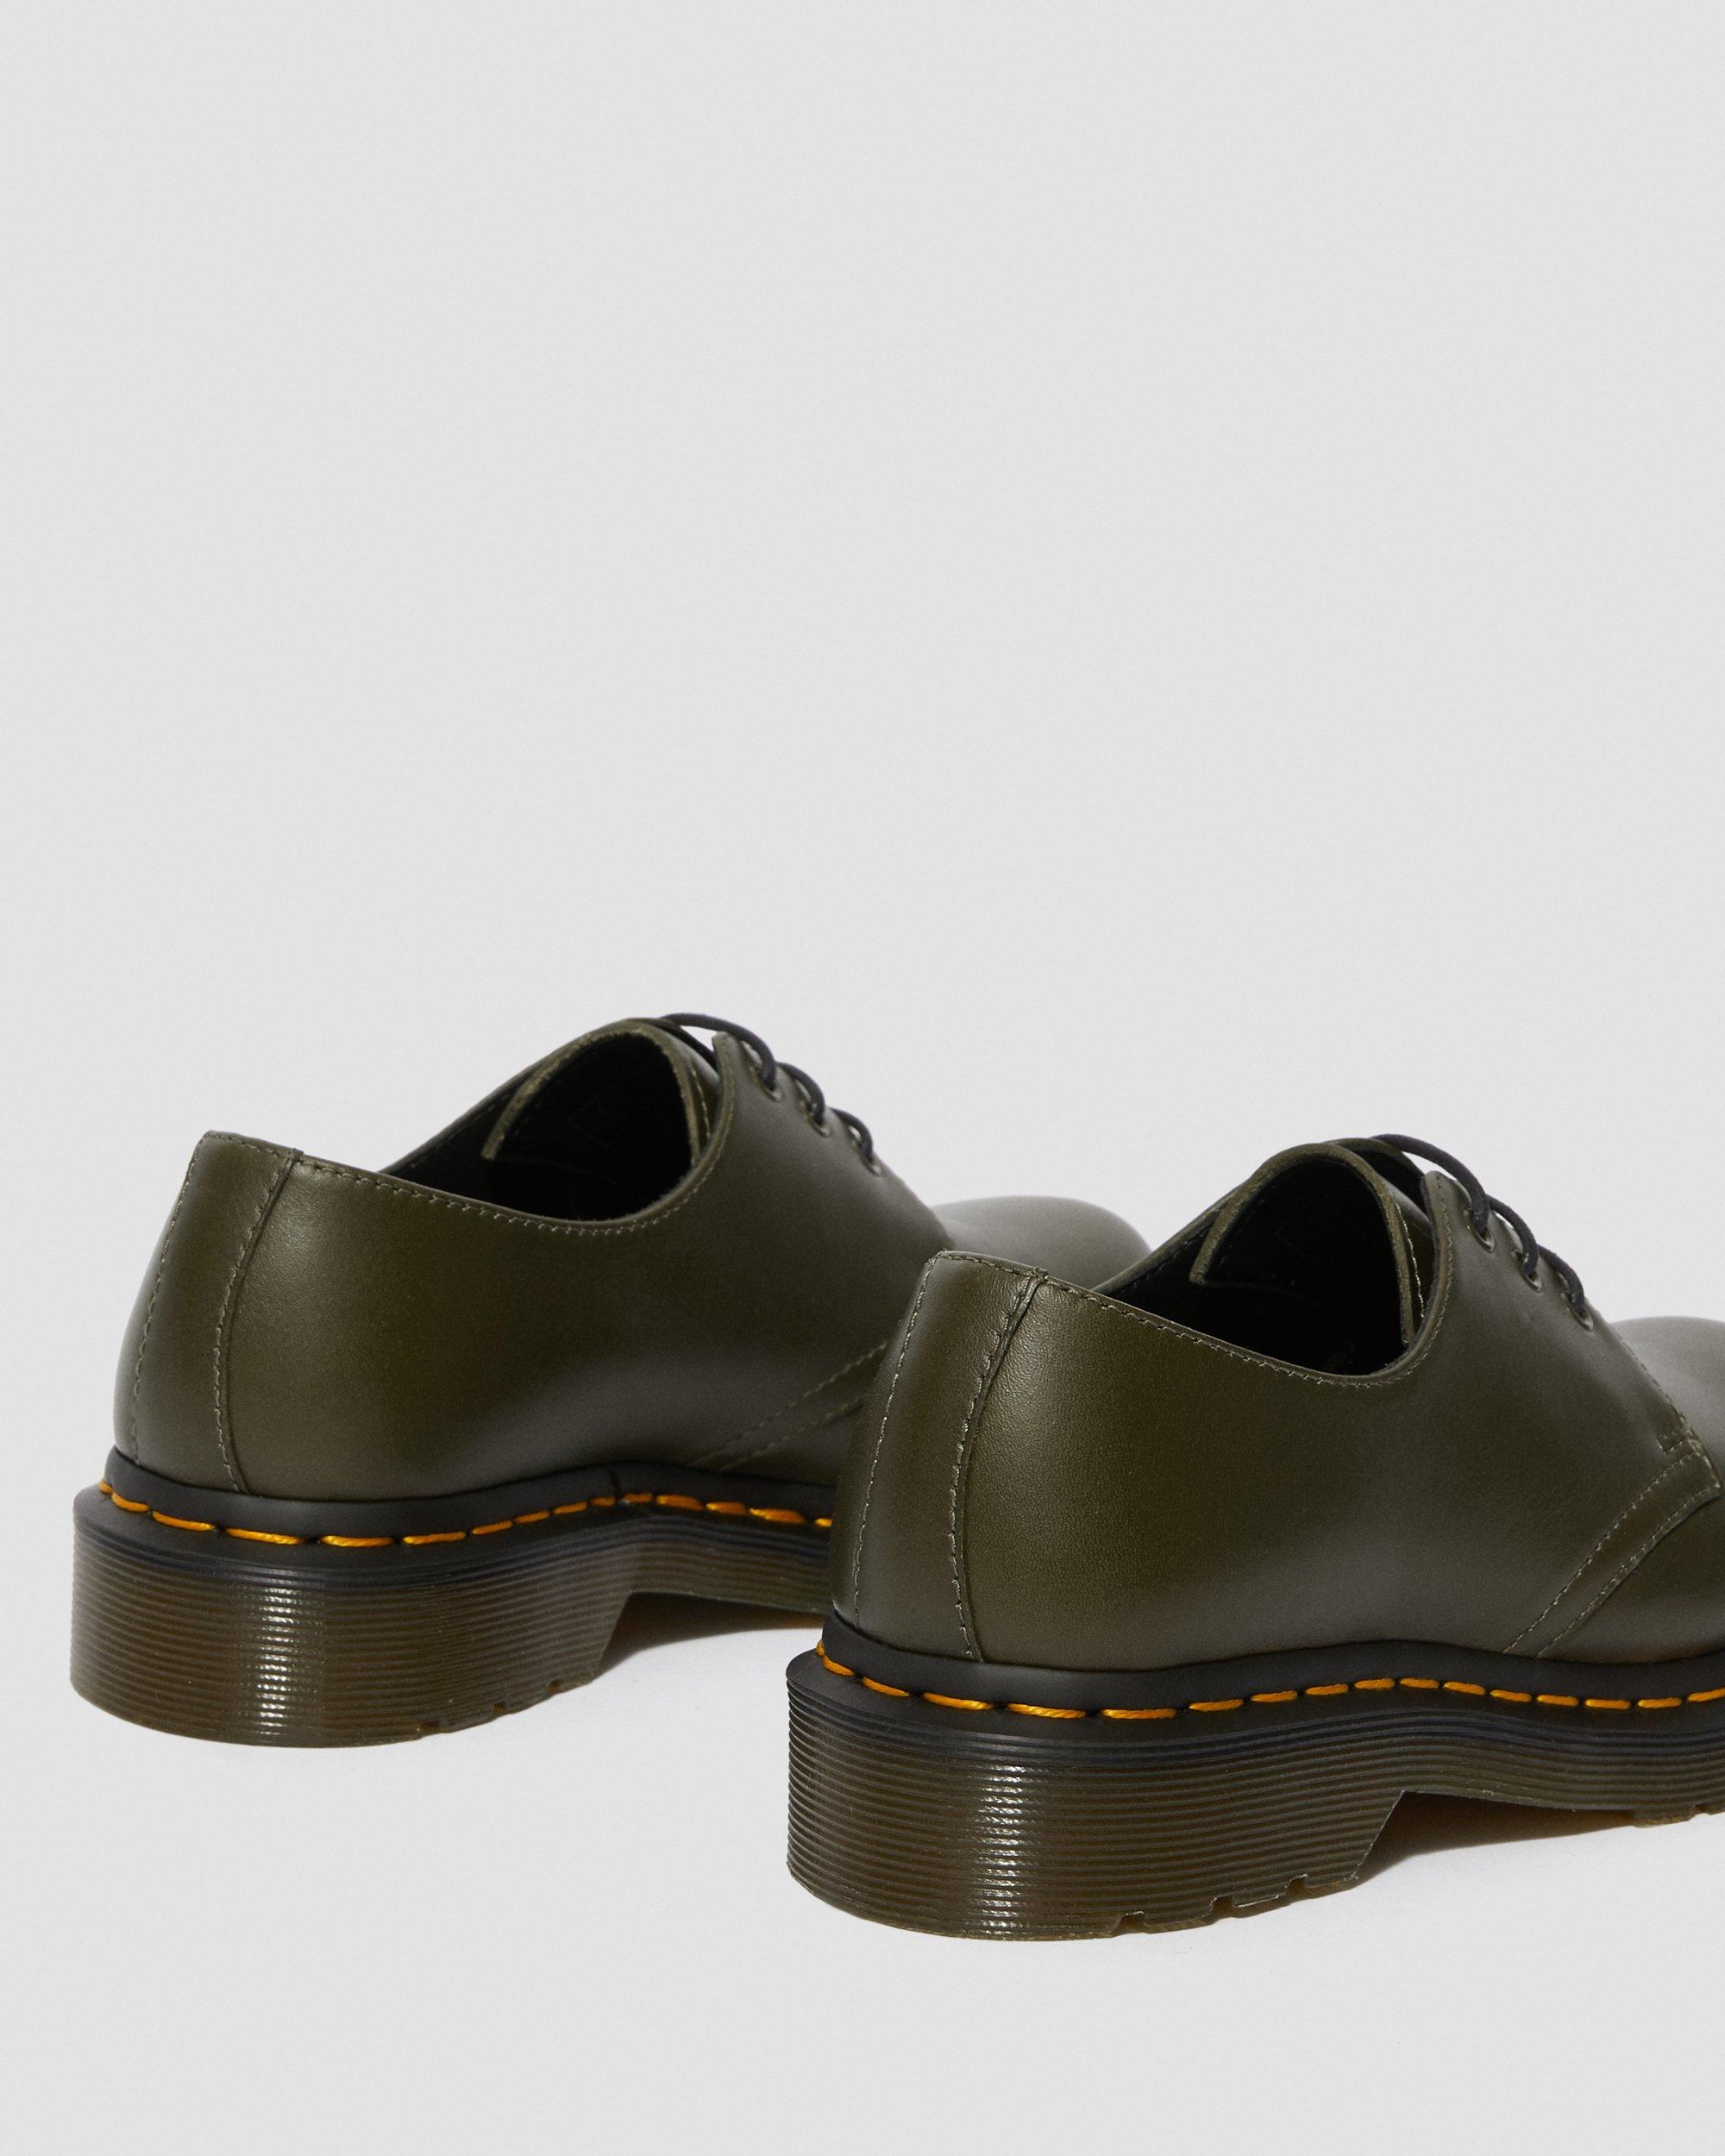 DR MARTENS 1461 Women's Wanama Leather Oxford Shoes